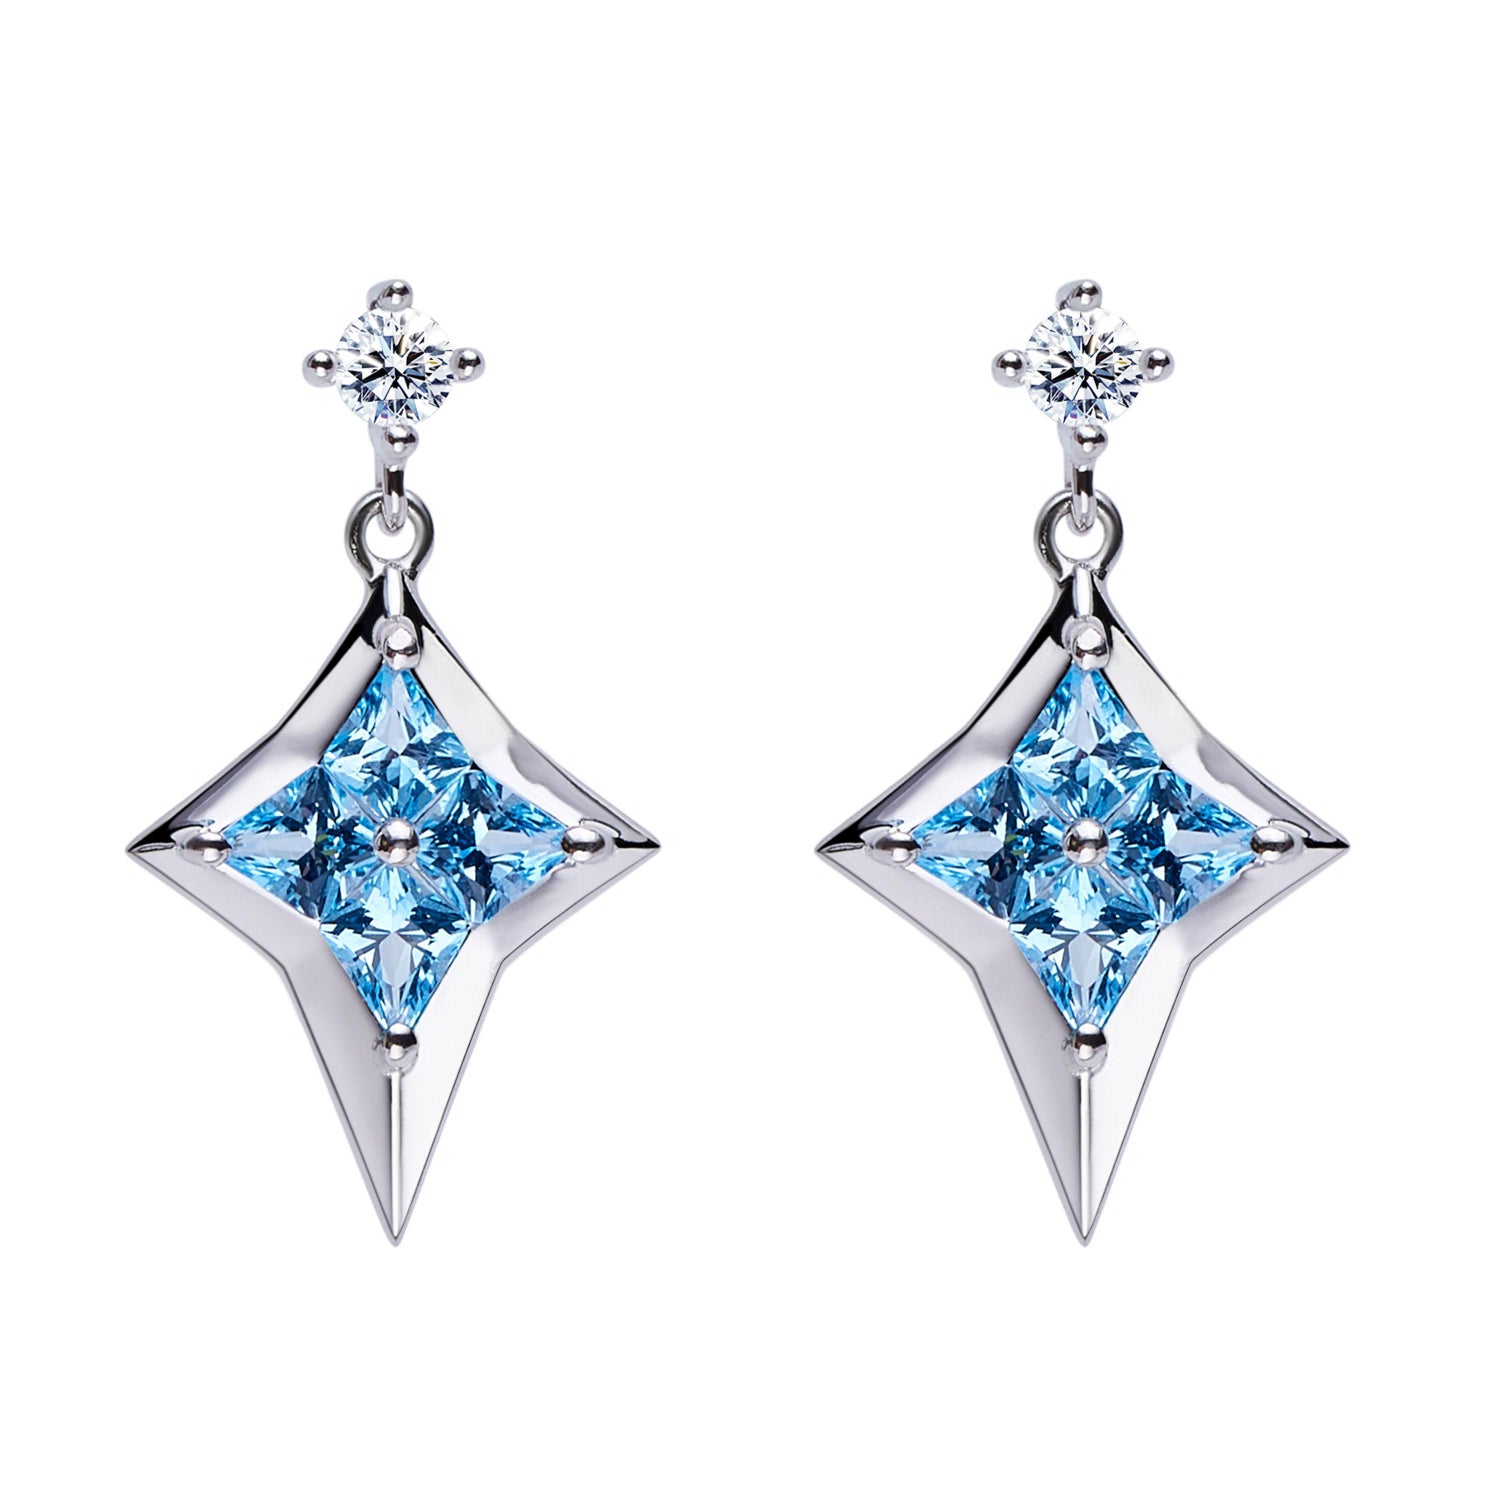 Blue Topaz 14k Black Gold Plated 925 Sterling Silver Snowflake Jewelry Set Ring Earrings Pendant 